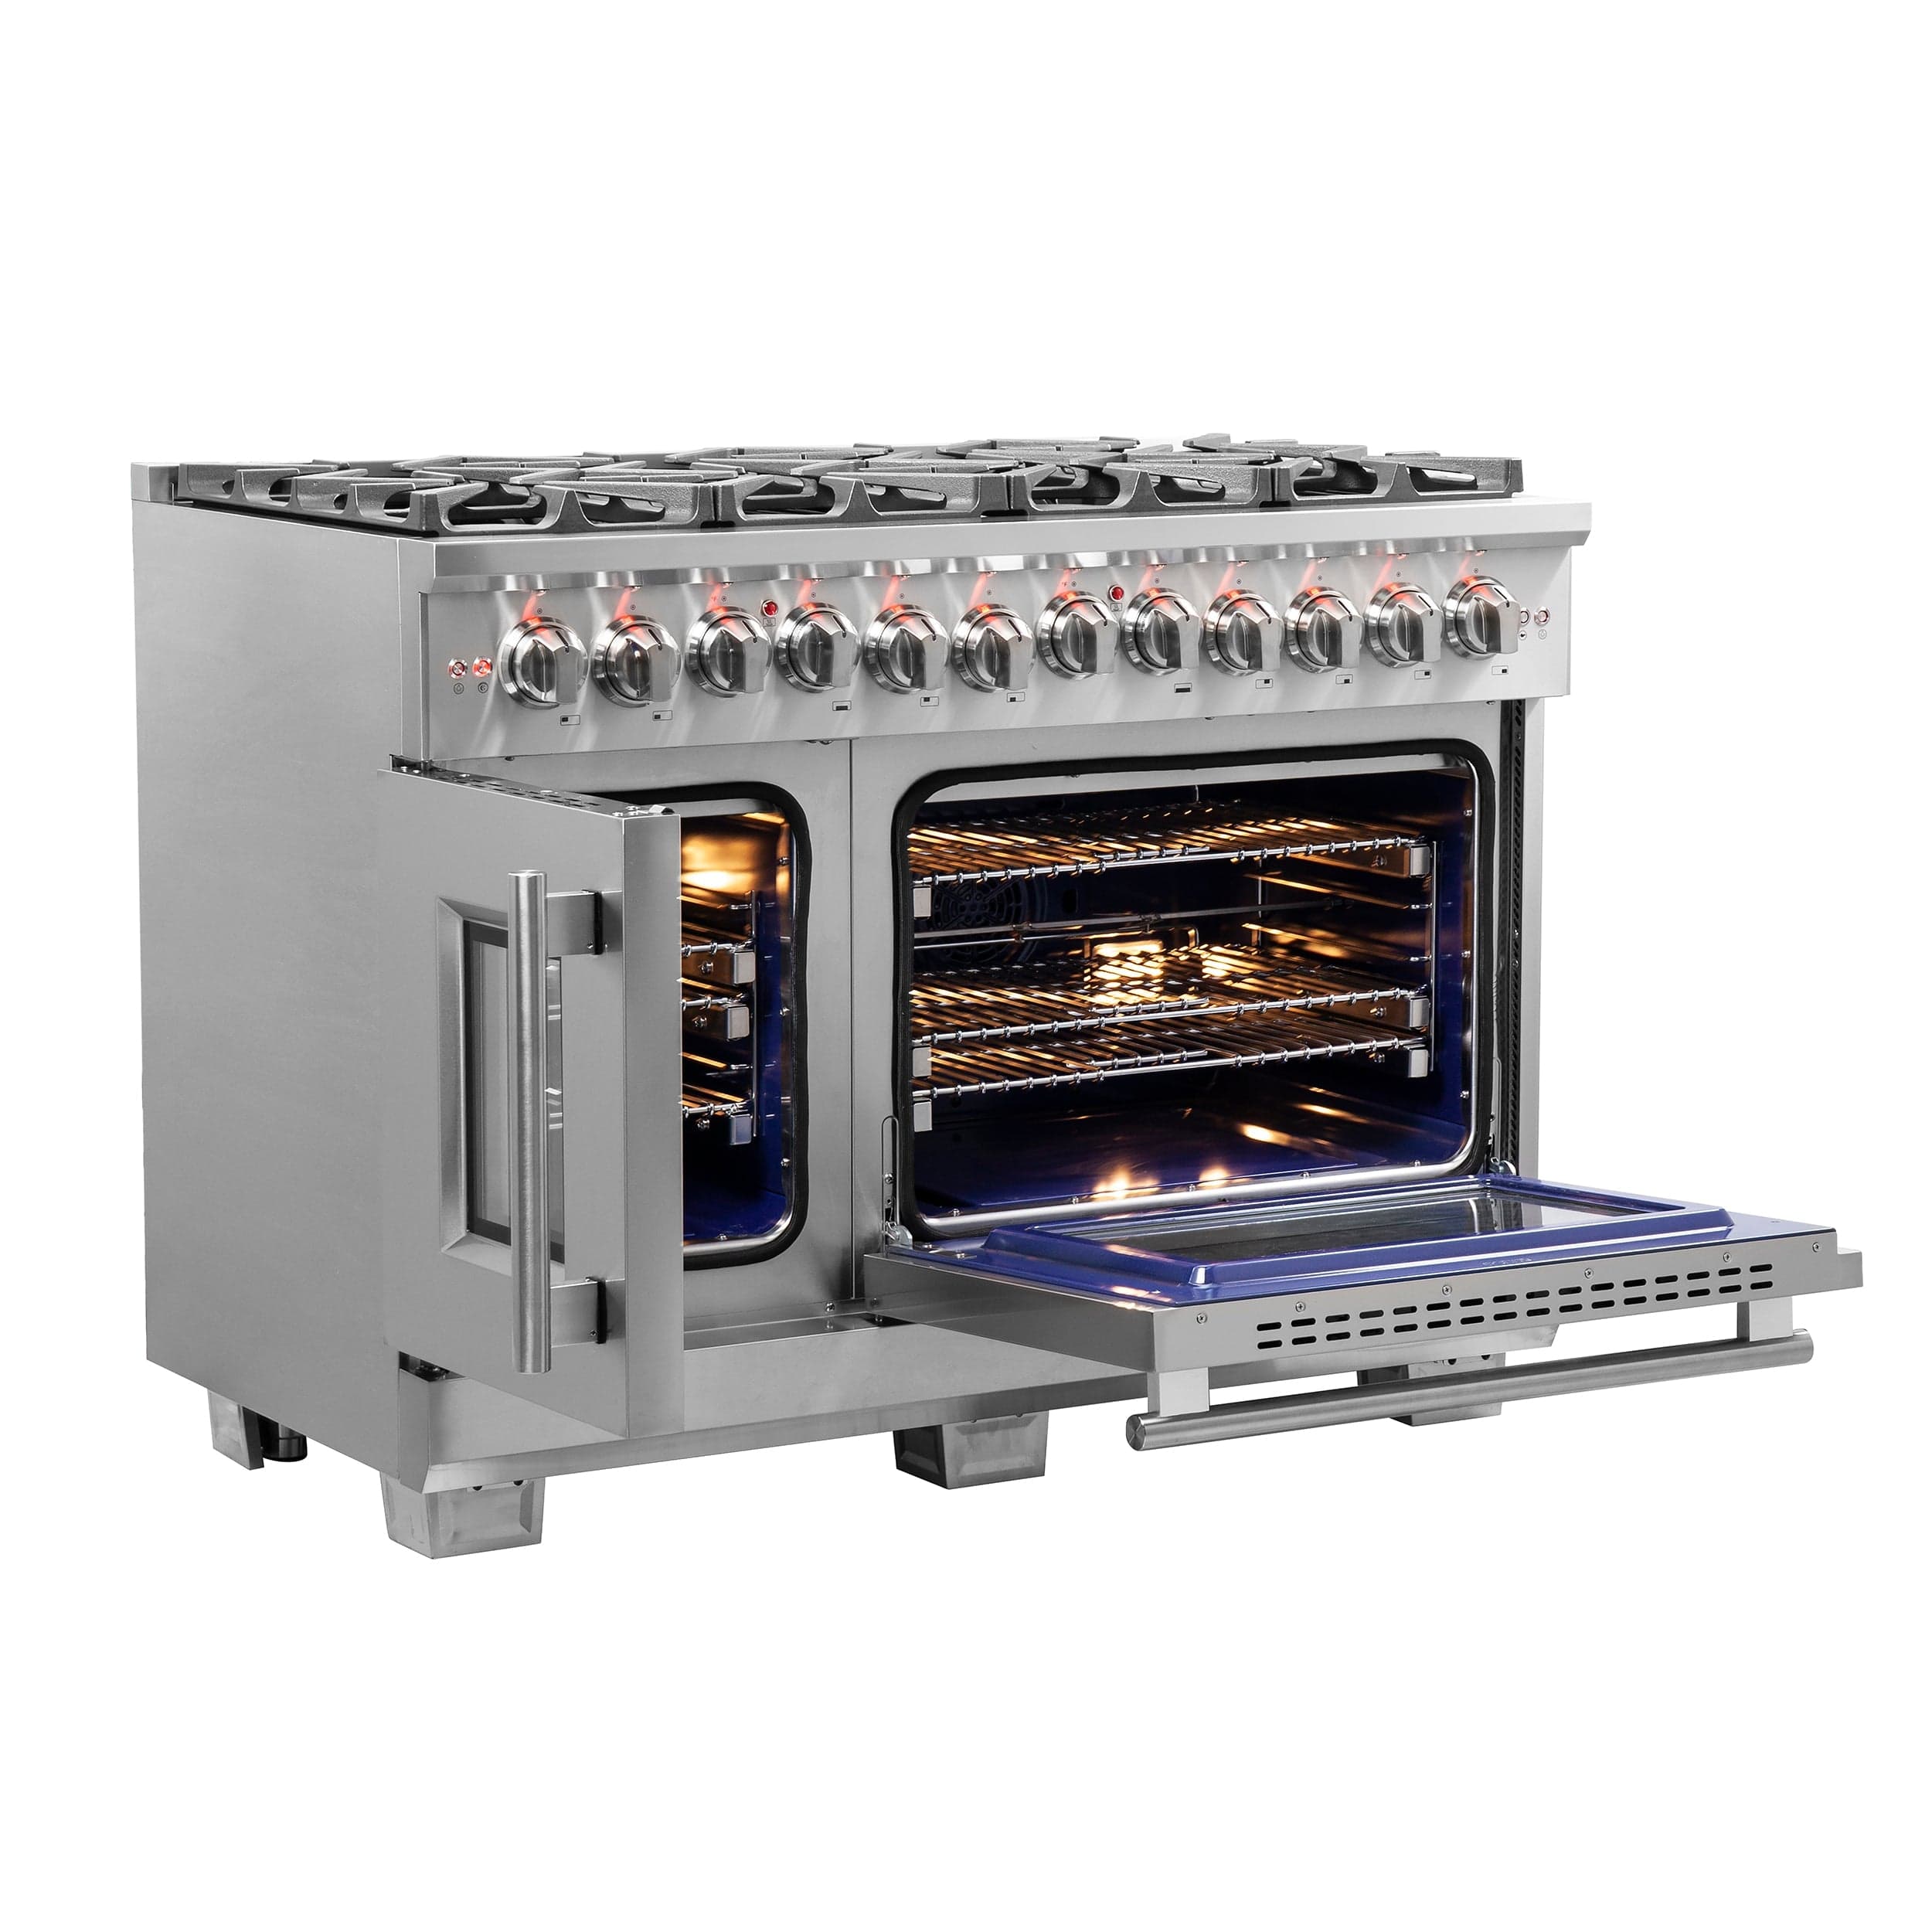 Forno 48" Professional Gas Burner, Electric Oven Range With French Door And 8 Sealed Burners, FFSGS6387-48 Range FFSGS6387-48 Luxury Appliances Direct